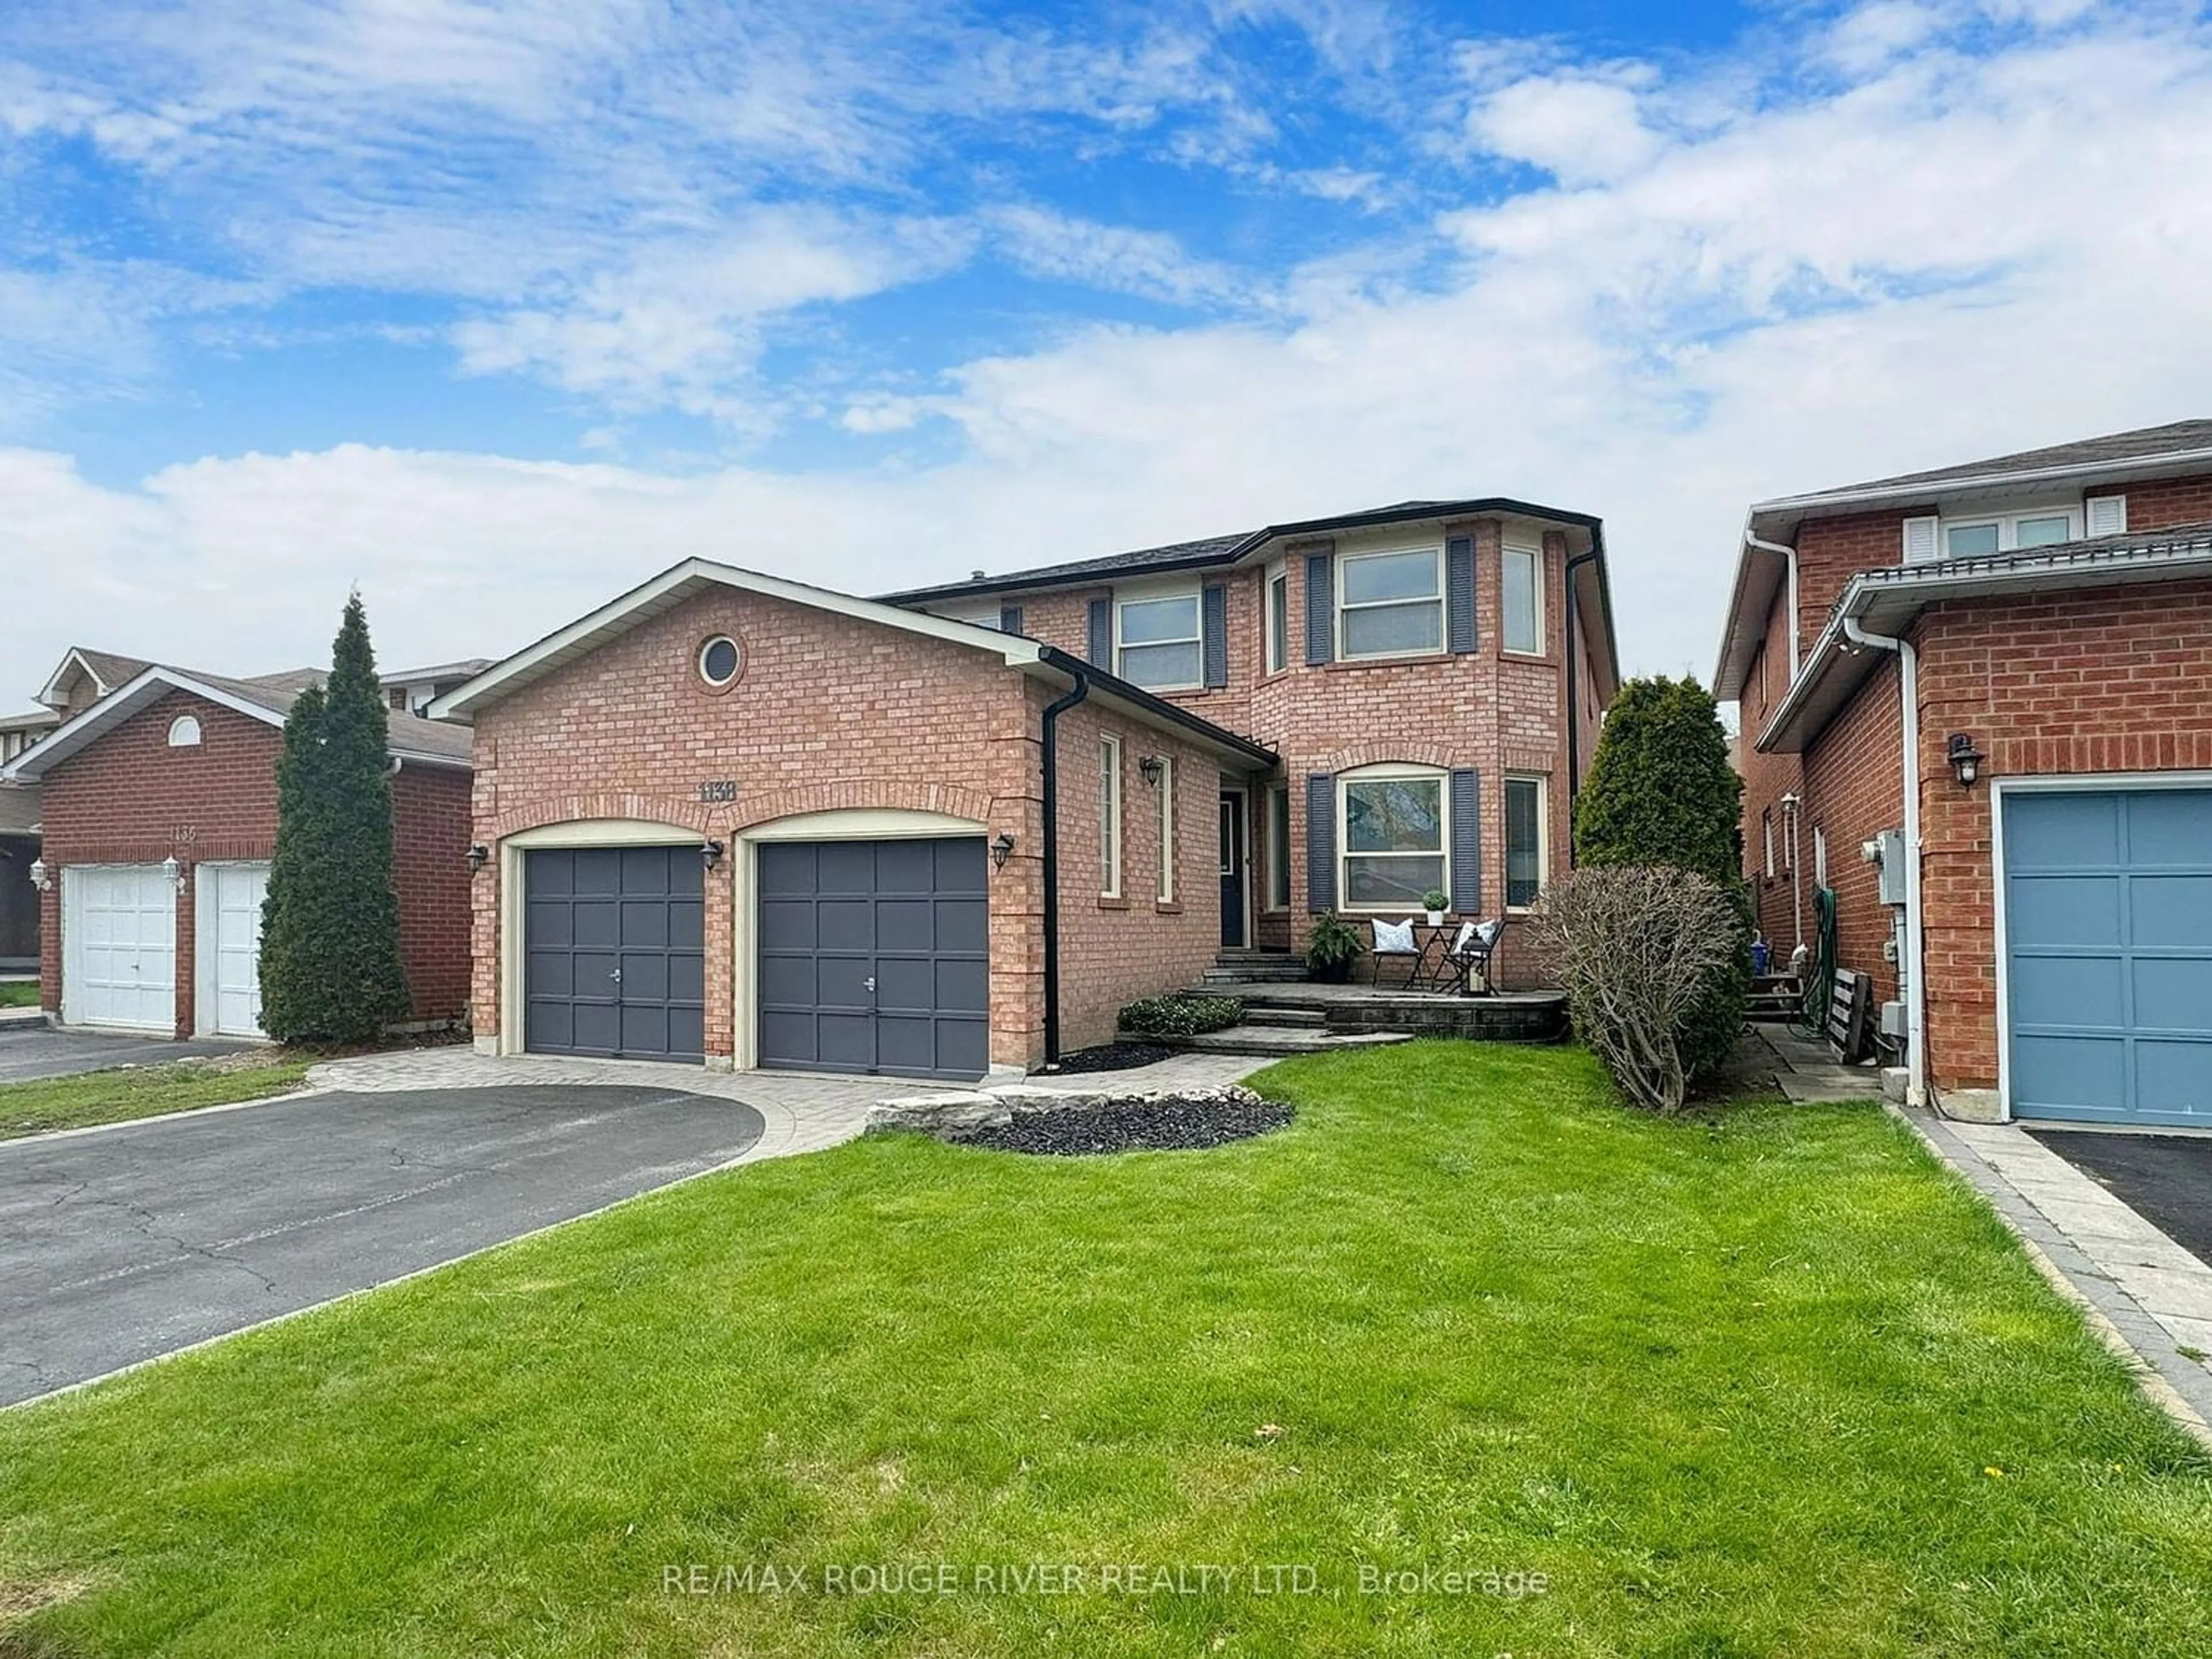 Home with brick exterior material for 1138 Ridgewood Crt, Pickering Ontario L1V 6M1